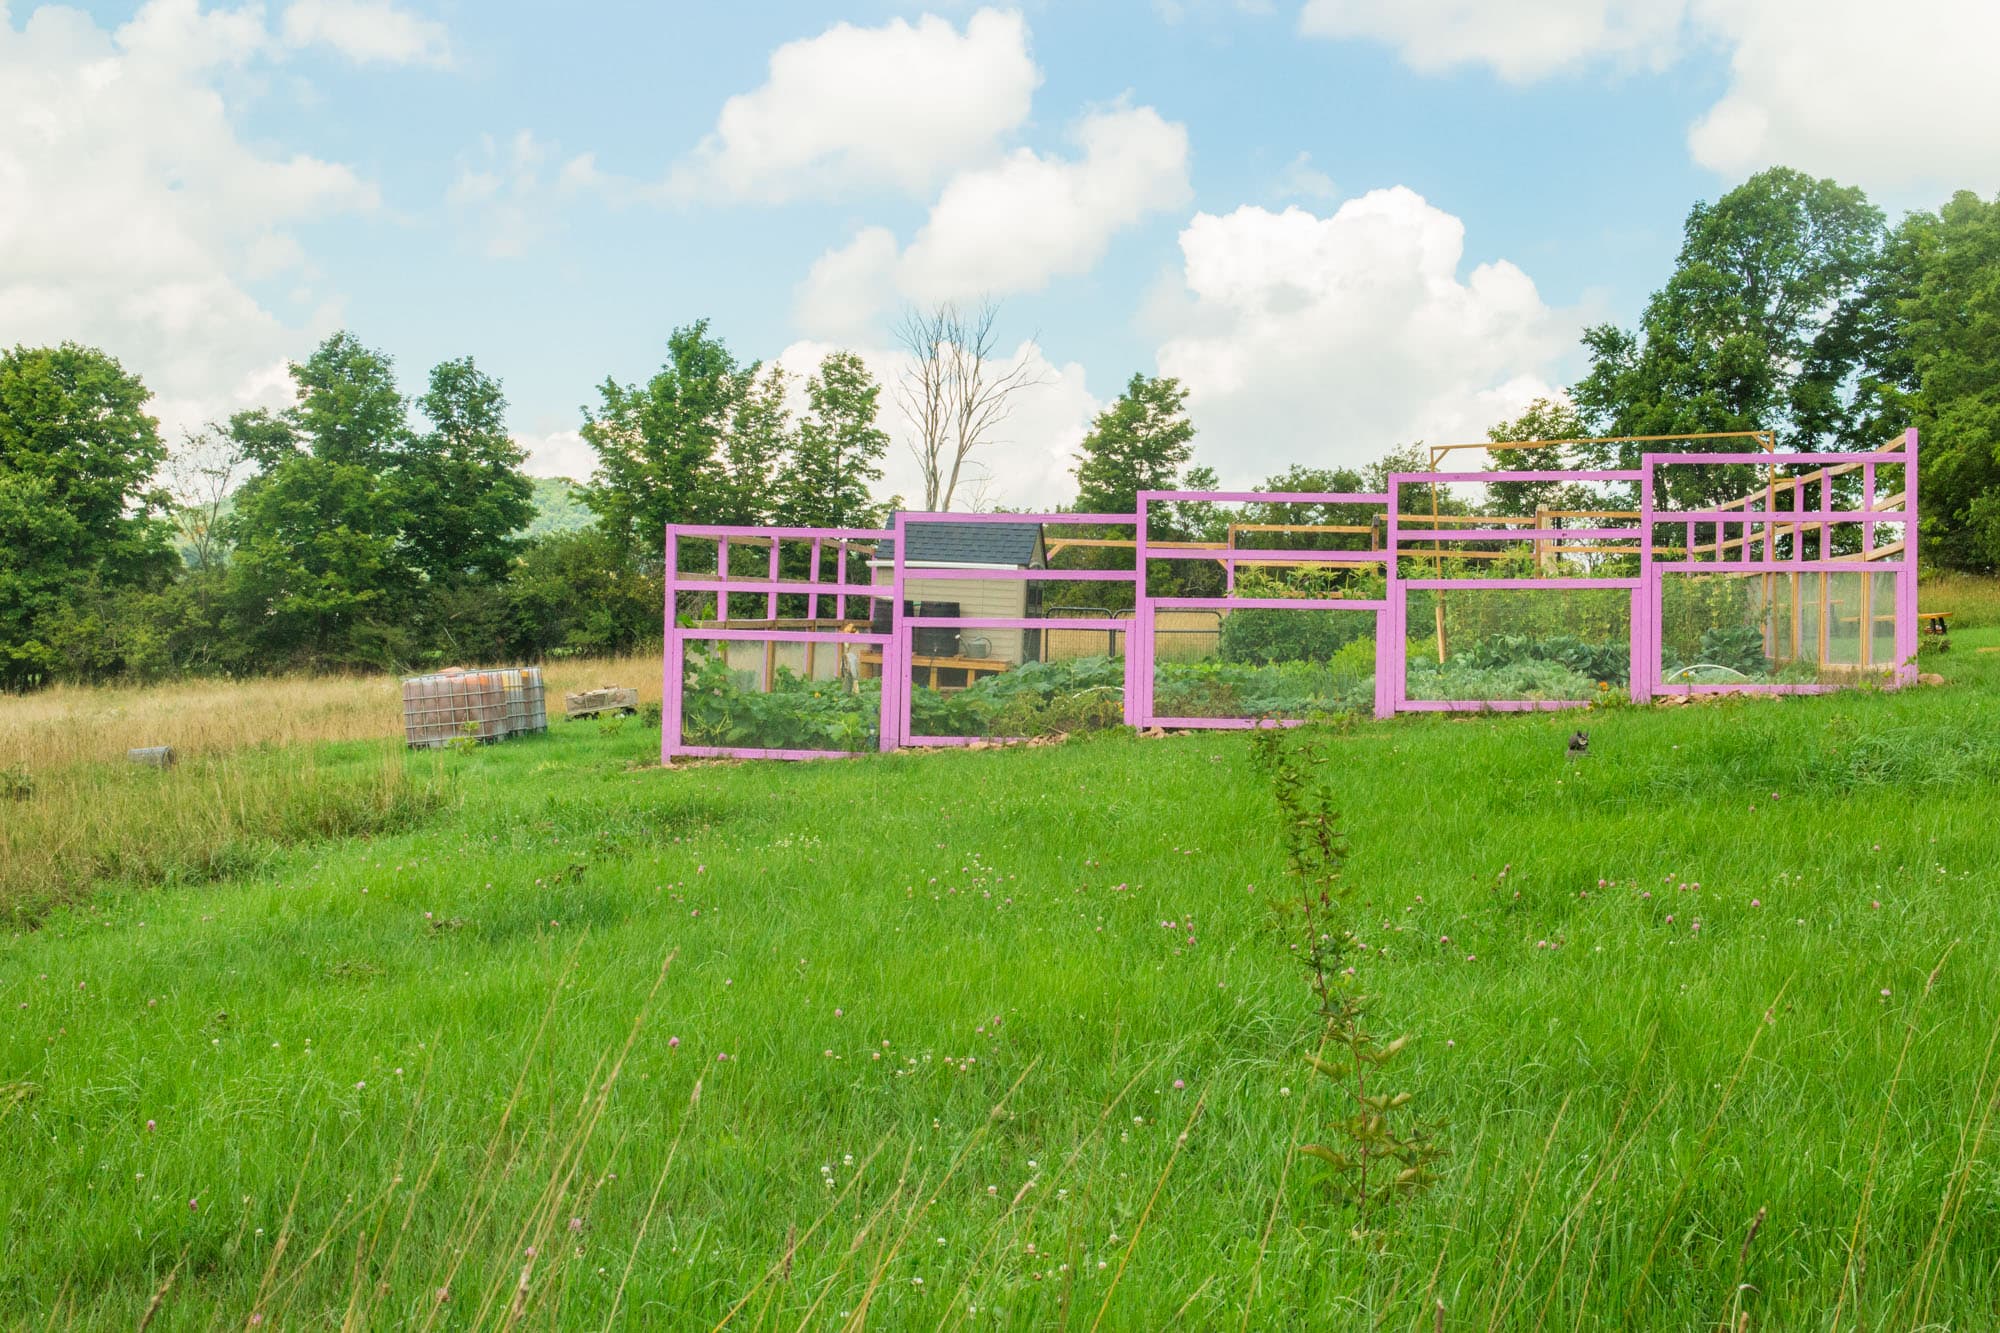 Brooklyn Farm Girl's Colorful Vegetable Garden in Upstate New York. 